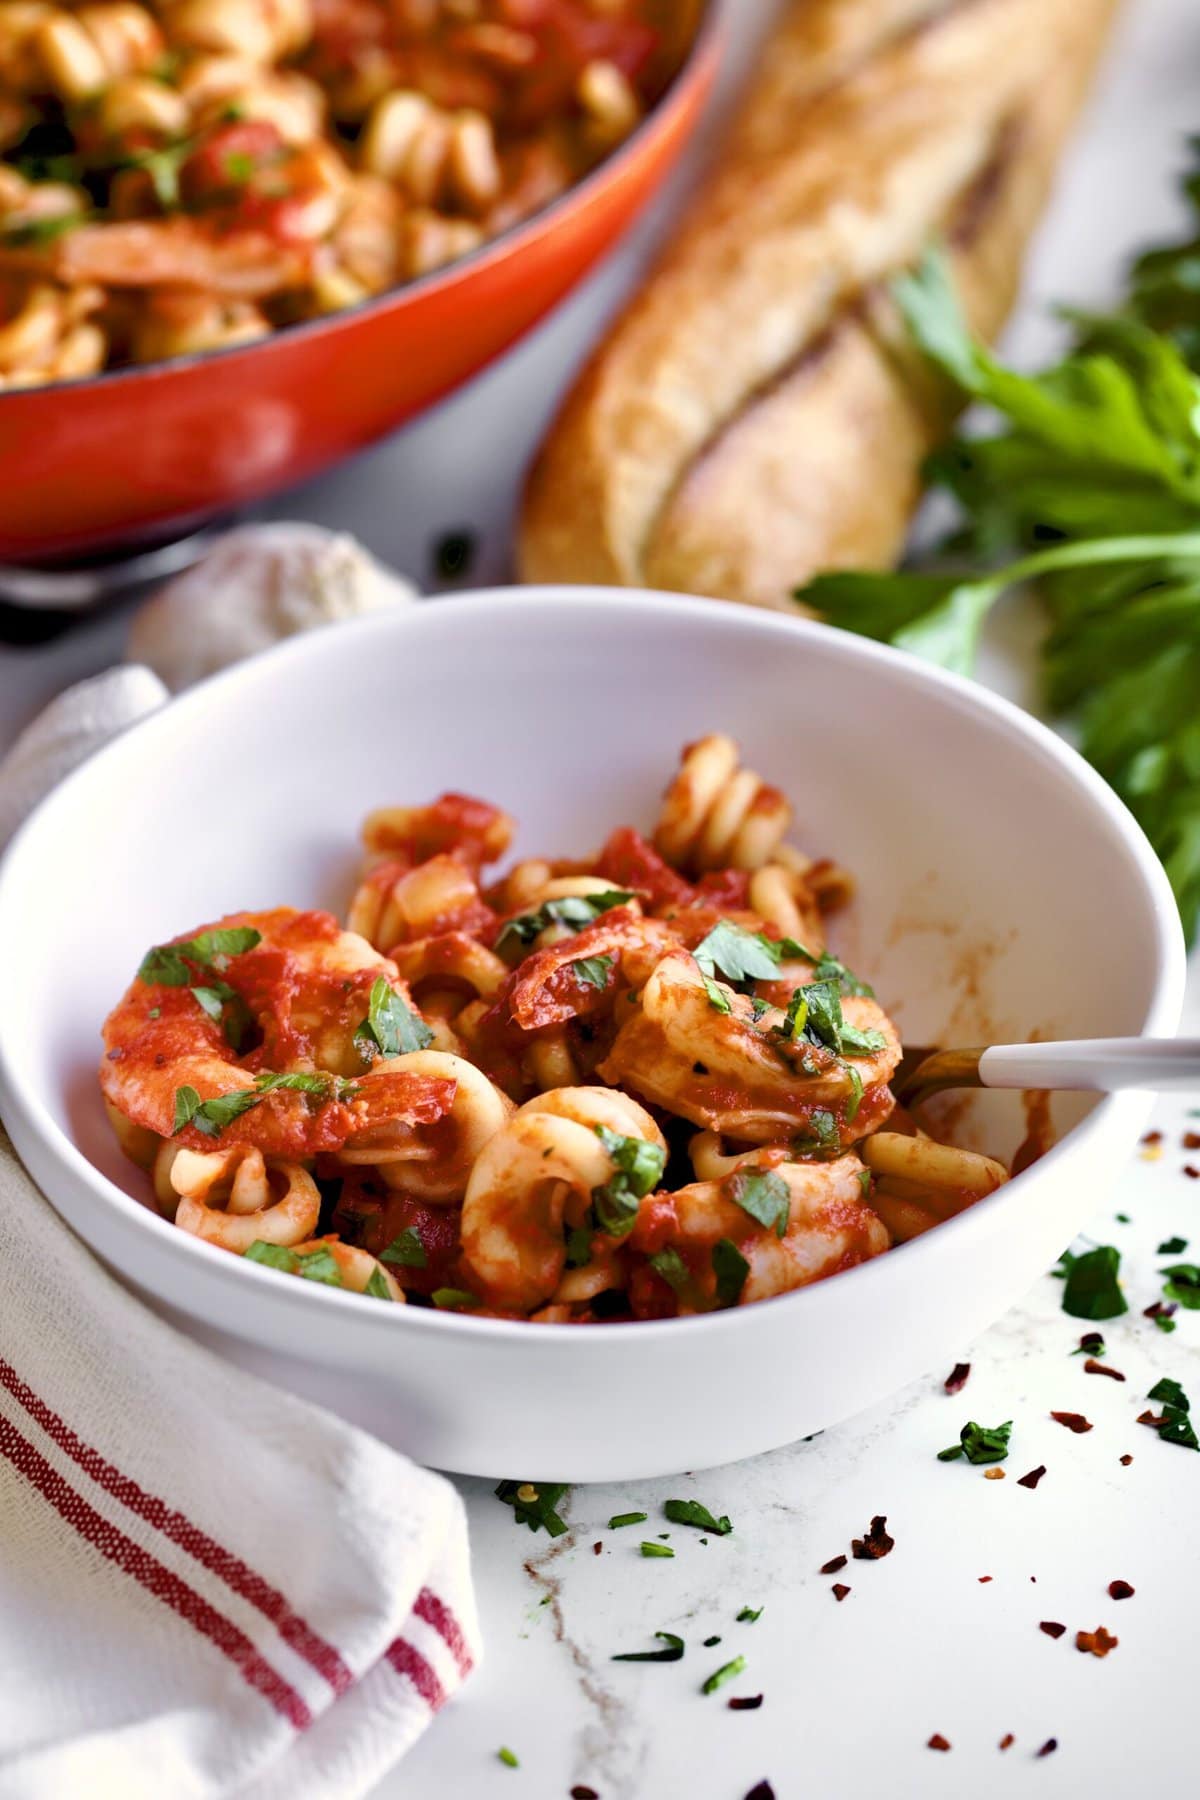 bowl ofTrottole Pasta Recipe with Tomato Sauce and Shrimp.